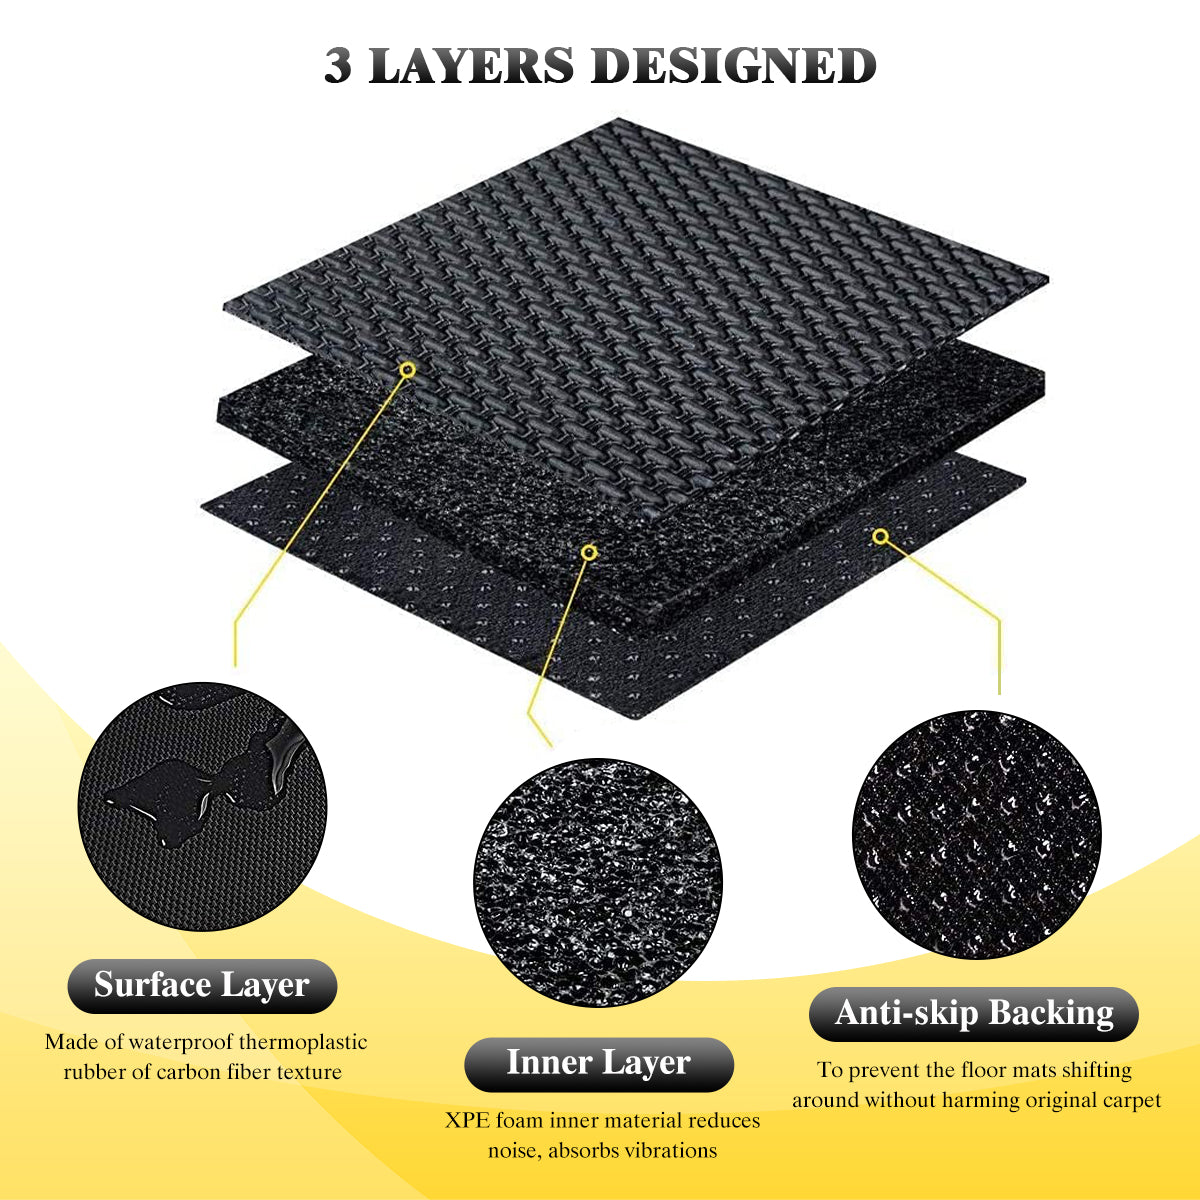 3 layers designed of floor liners